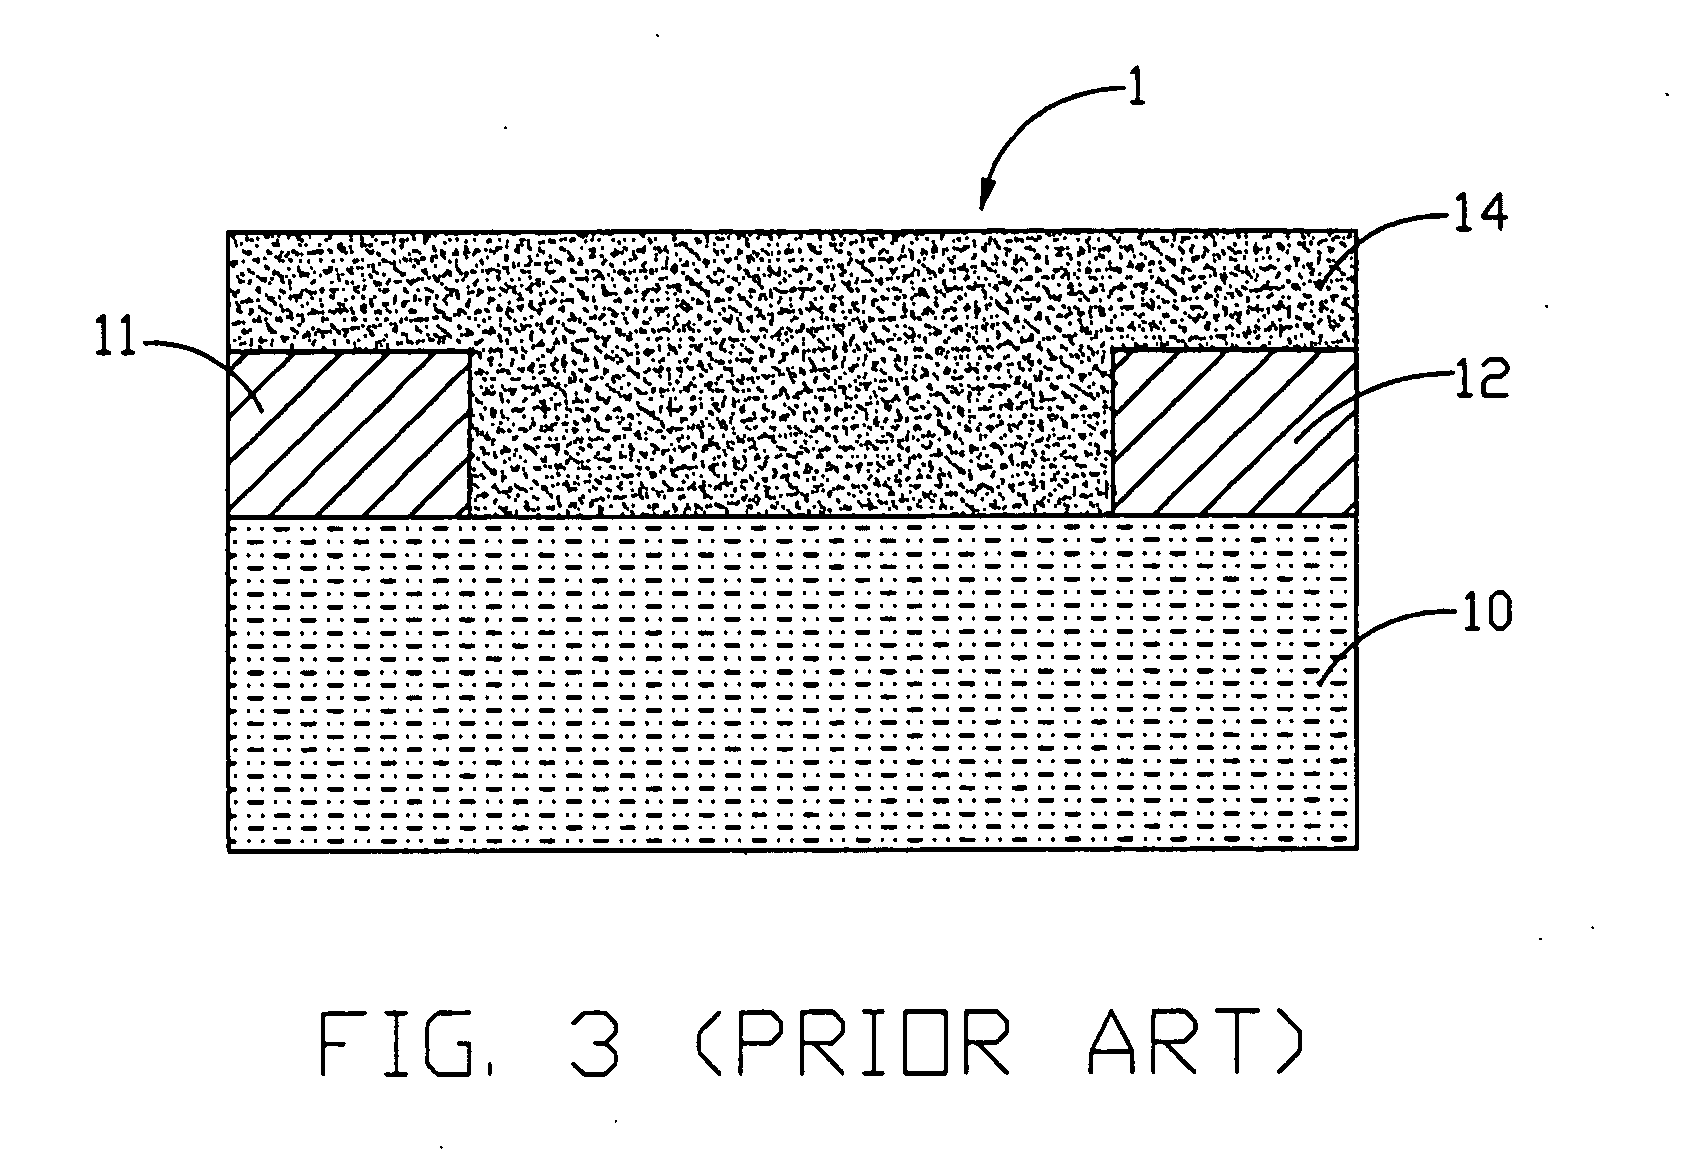 Gas sensor with zinc oxide layer and method for forming the same